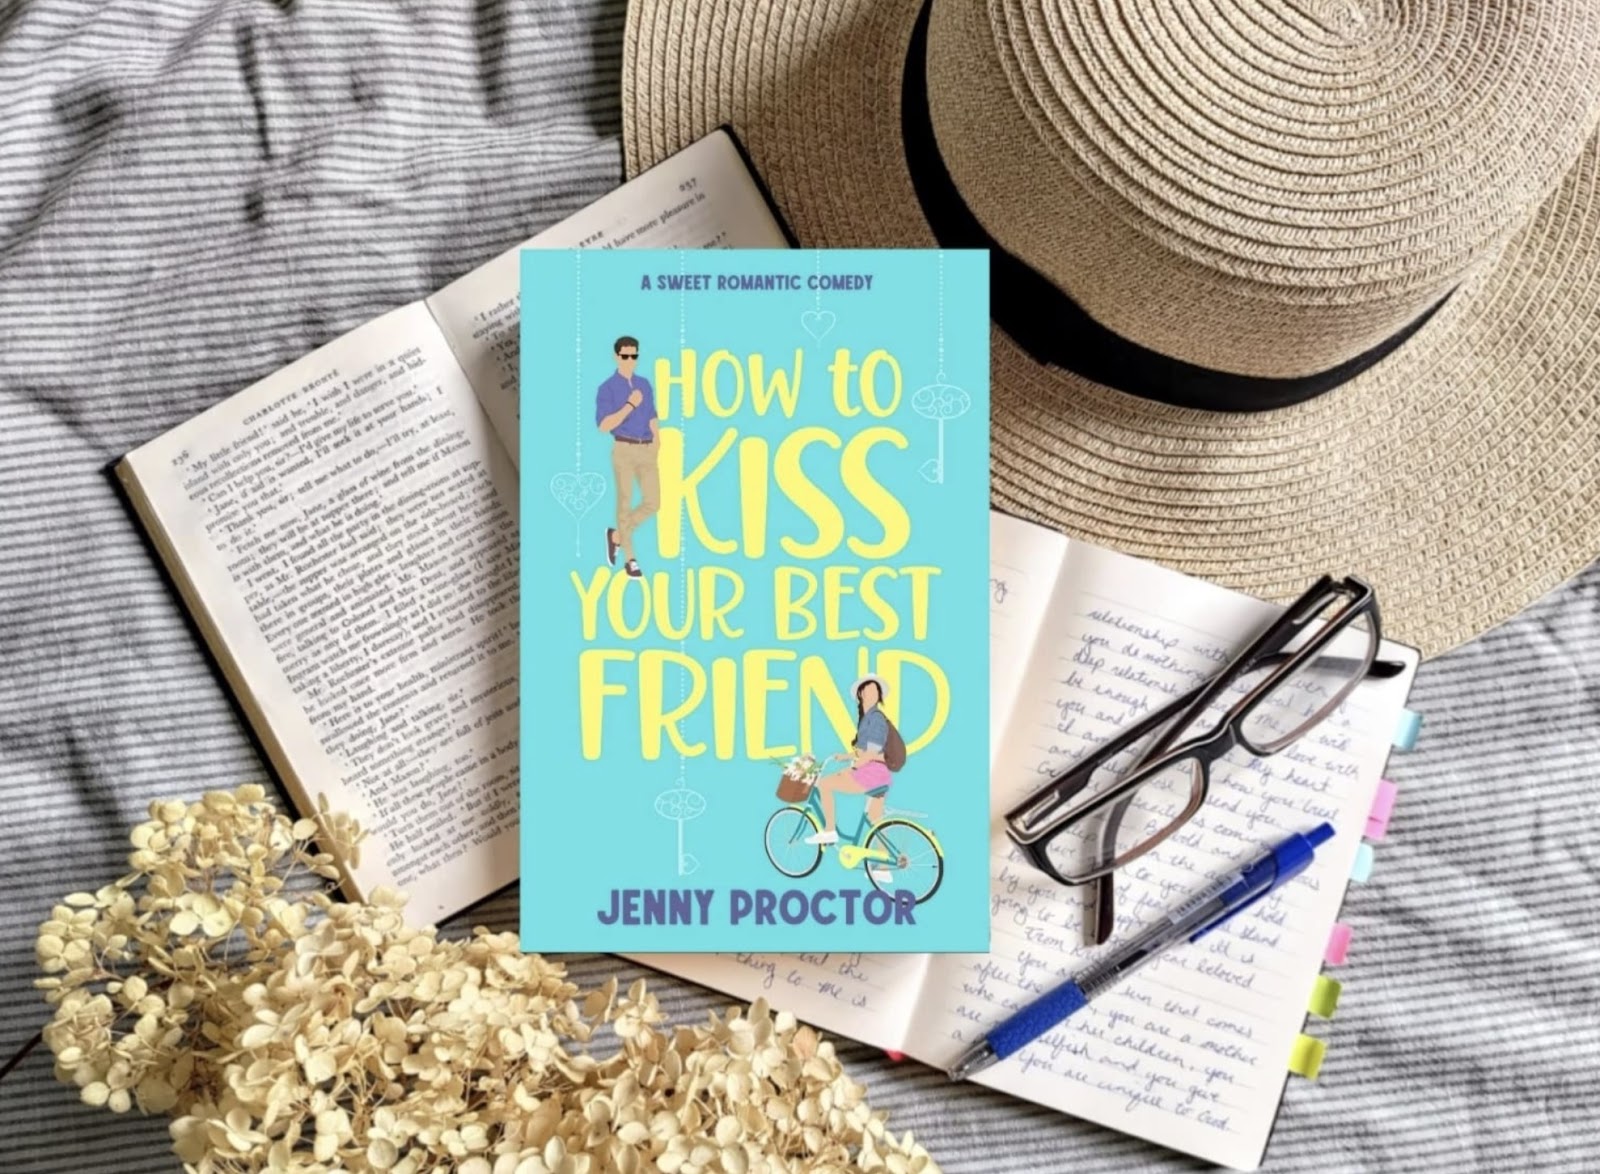 Book "How to Kiss Your Best Friend" on a notepad with a pen and a hat